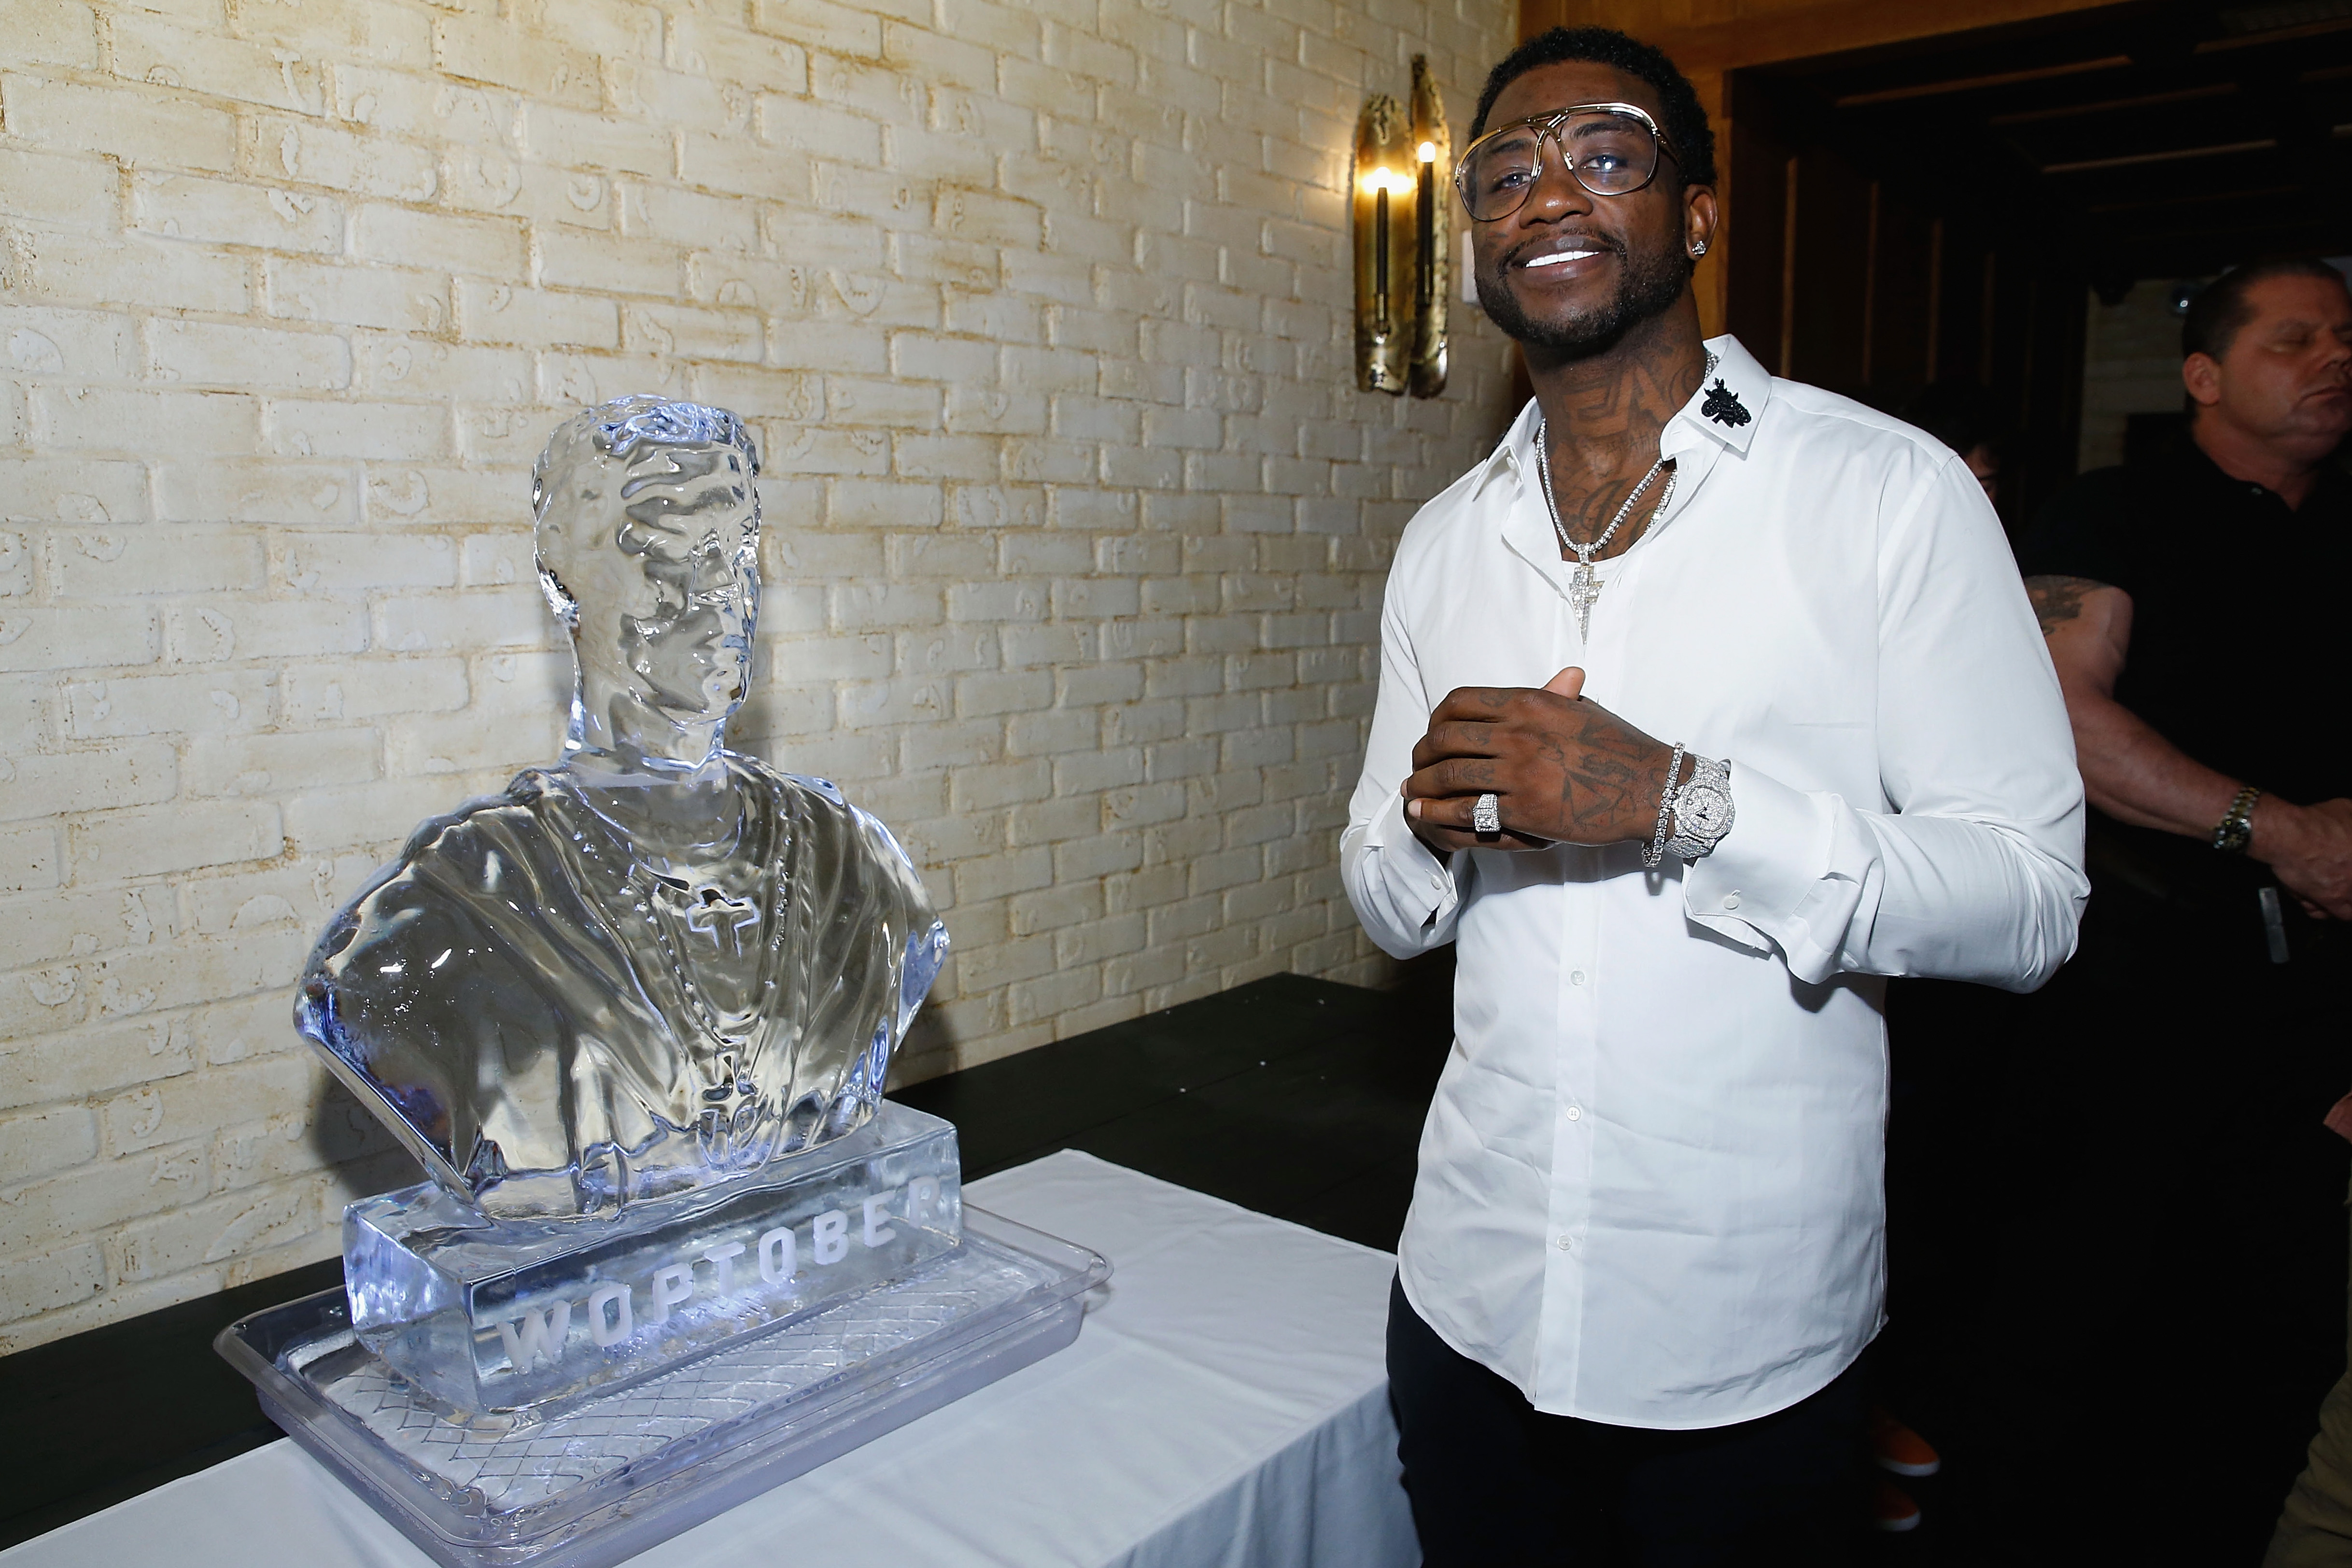 Gucci Mane at a private dinner in New York City